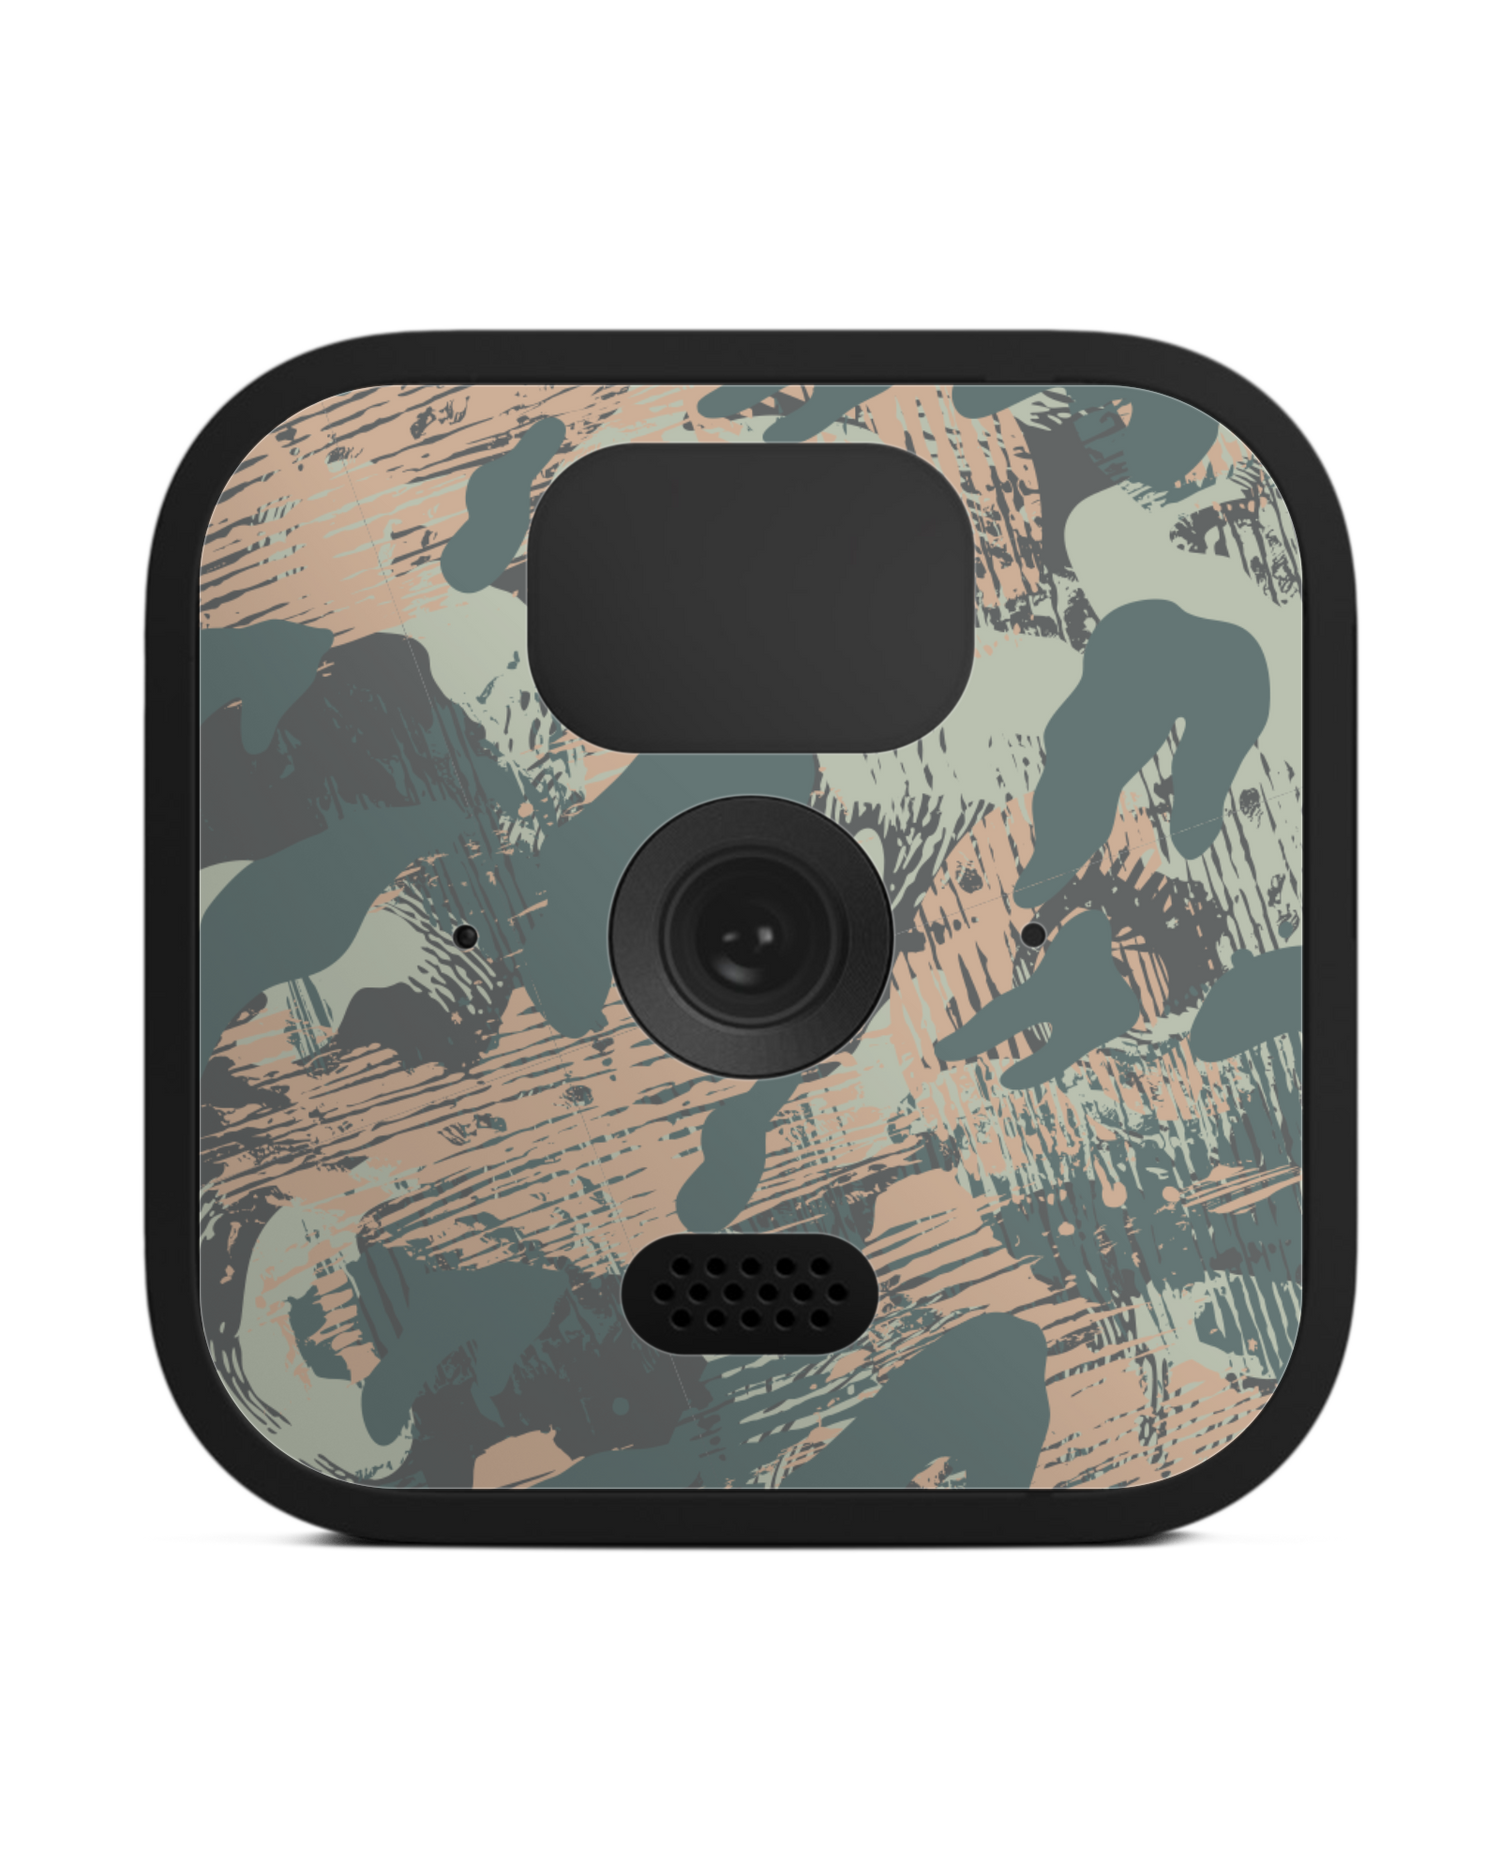 Camouflage Mix Camera Skin Blink Outdoor (2020): Front View